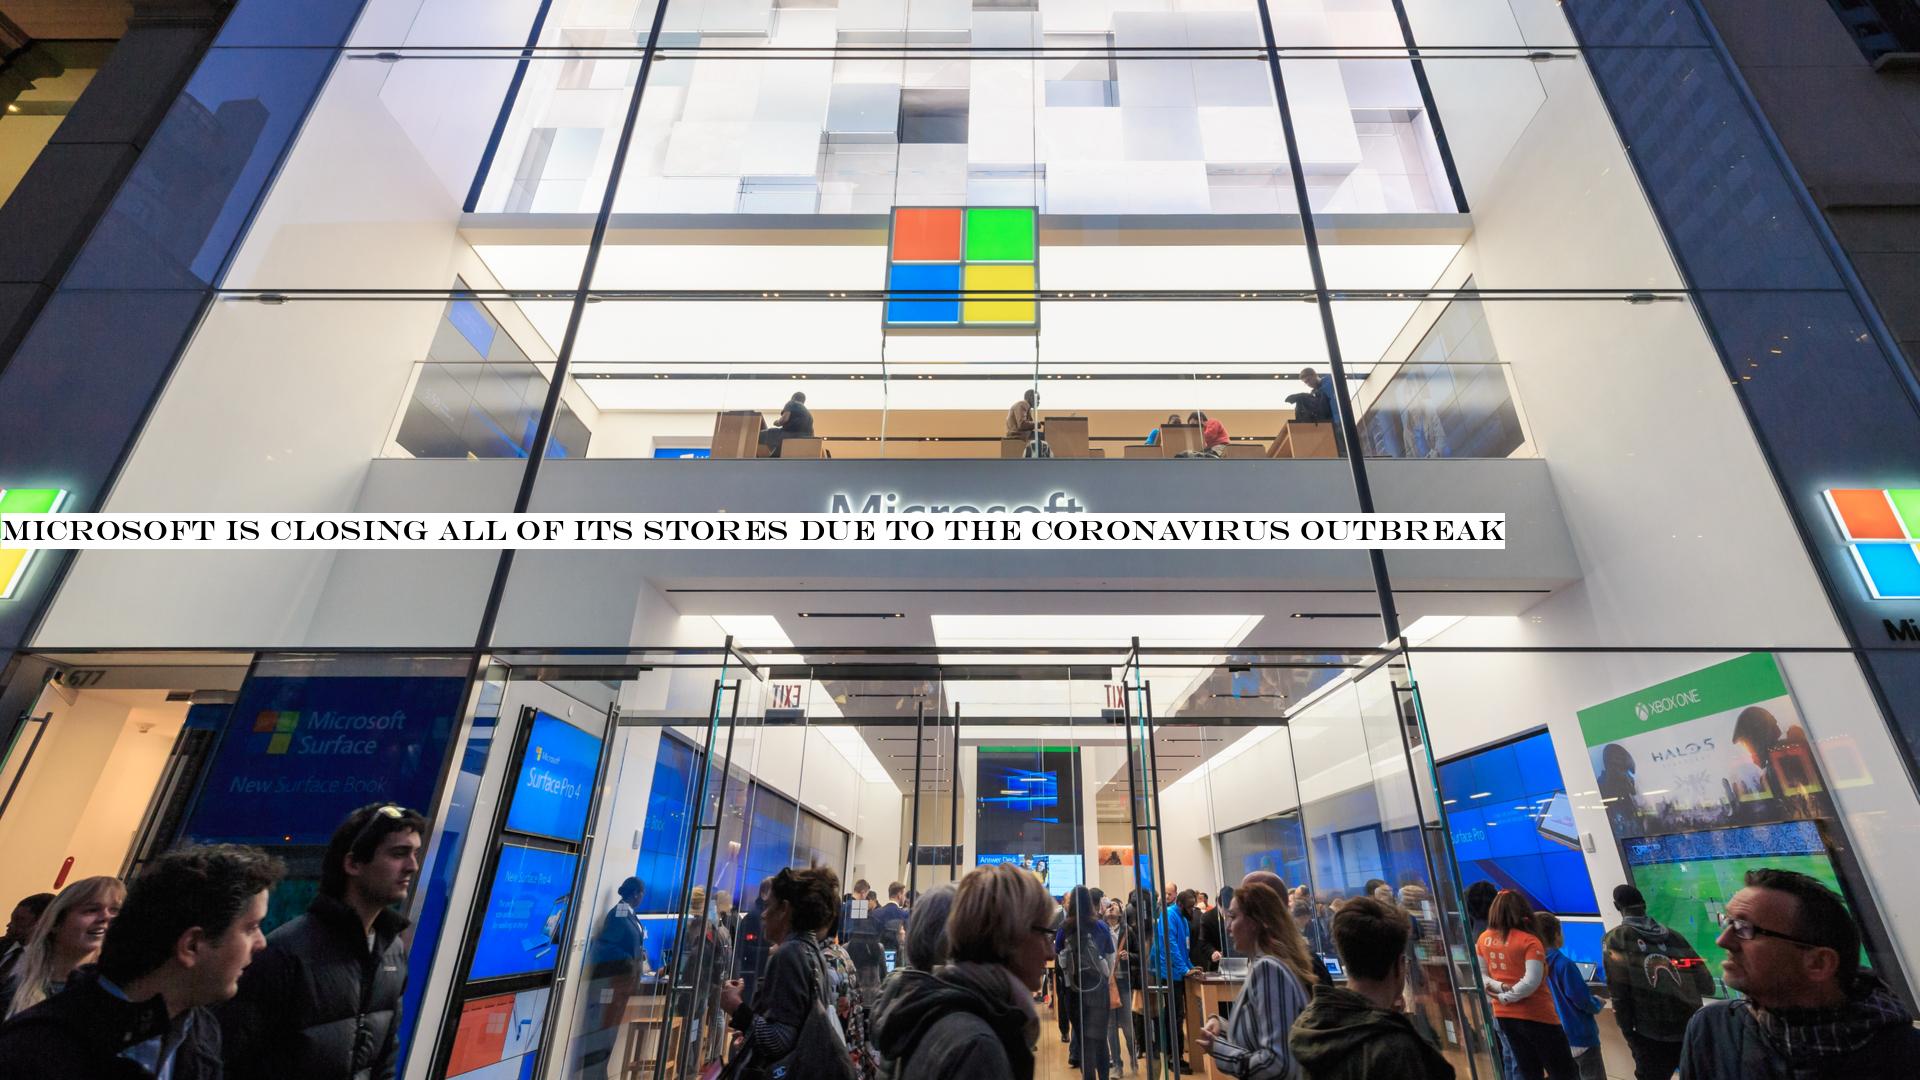 Microsoft is closing all of its stores due to the coronavirus outbreak